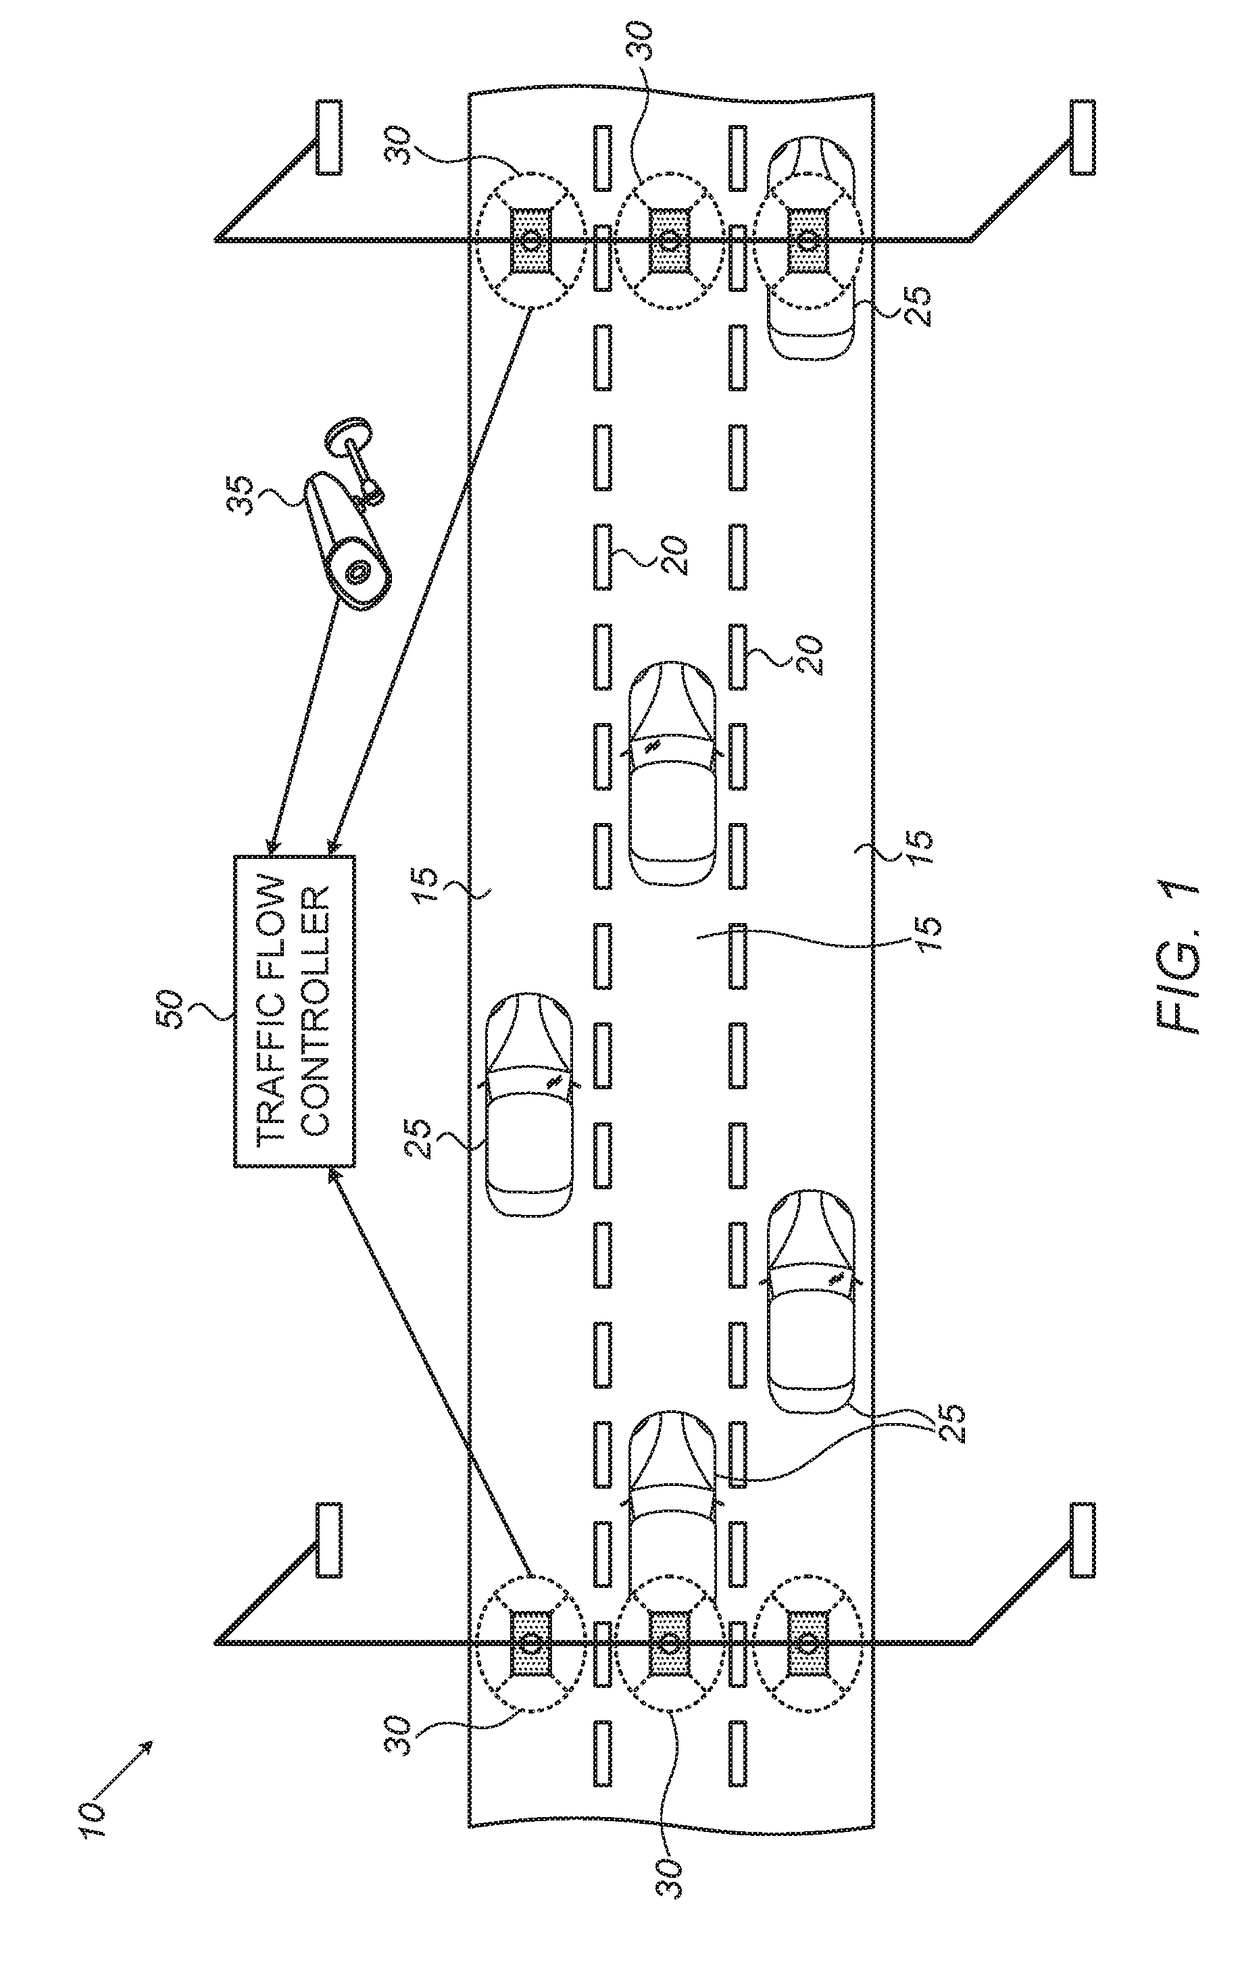 System and method for traffic flow management using an adaptive lane system